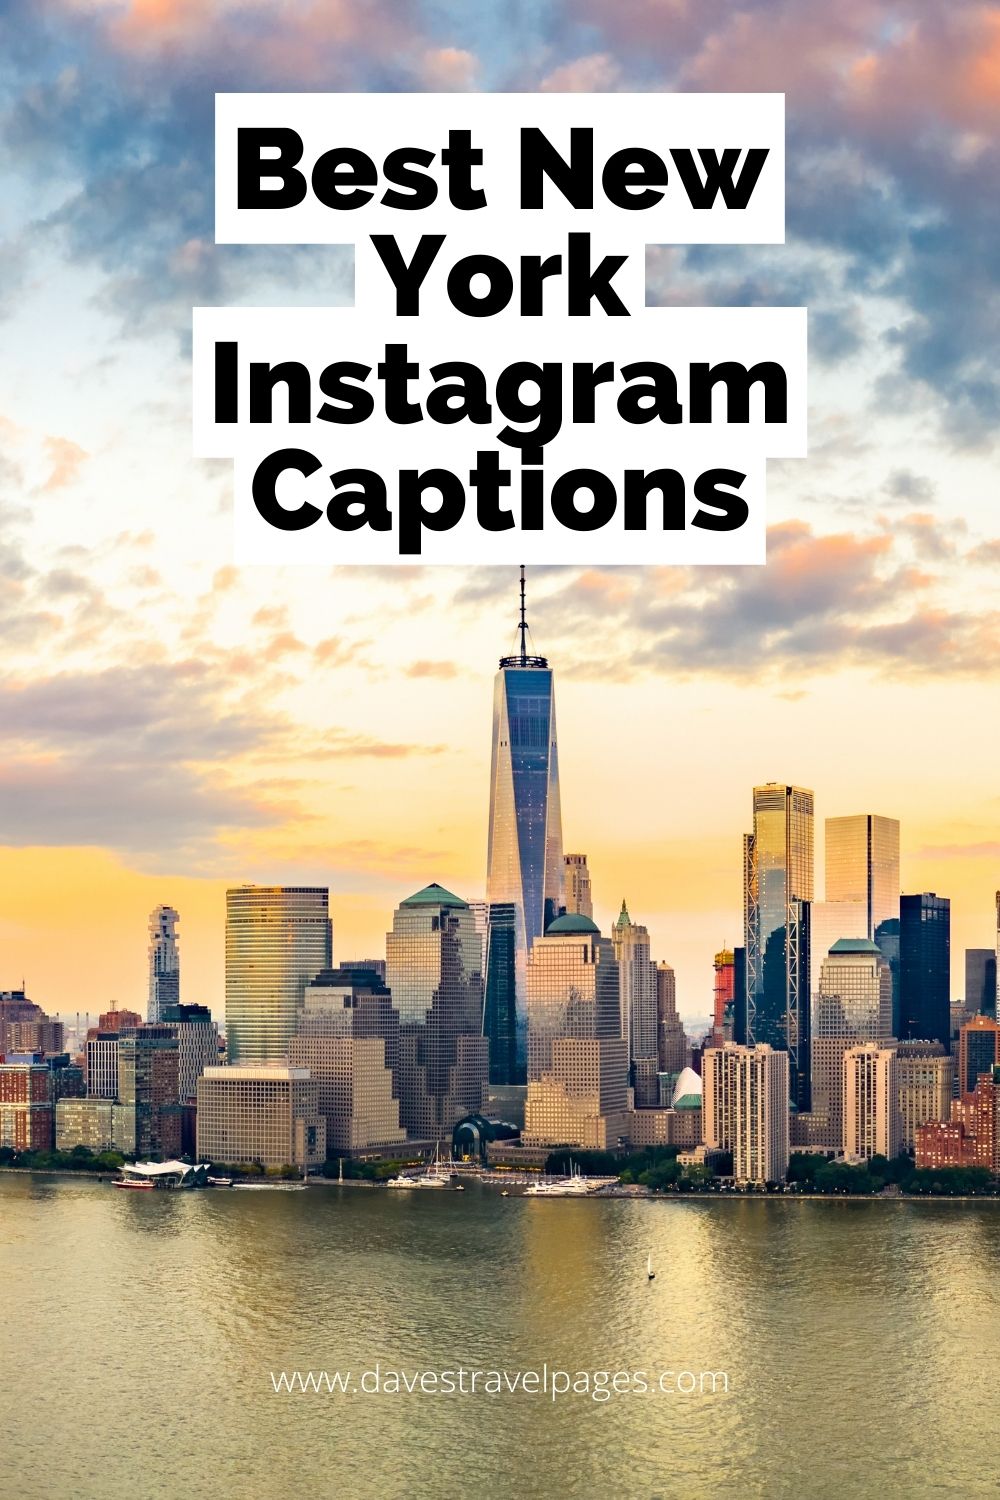 Instagram Captions About New York